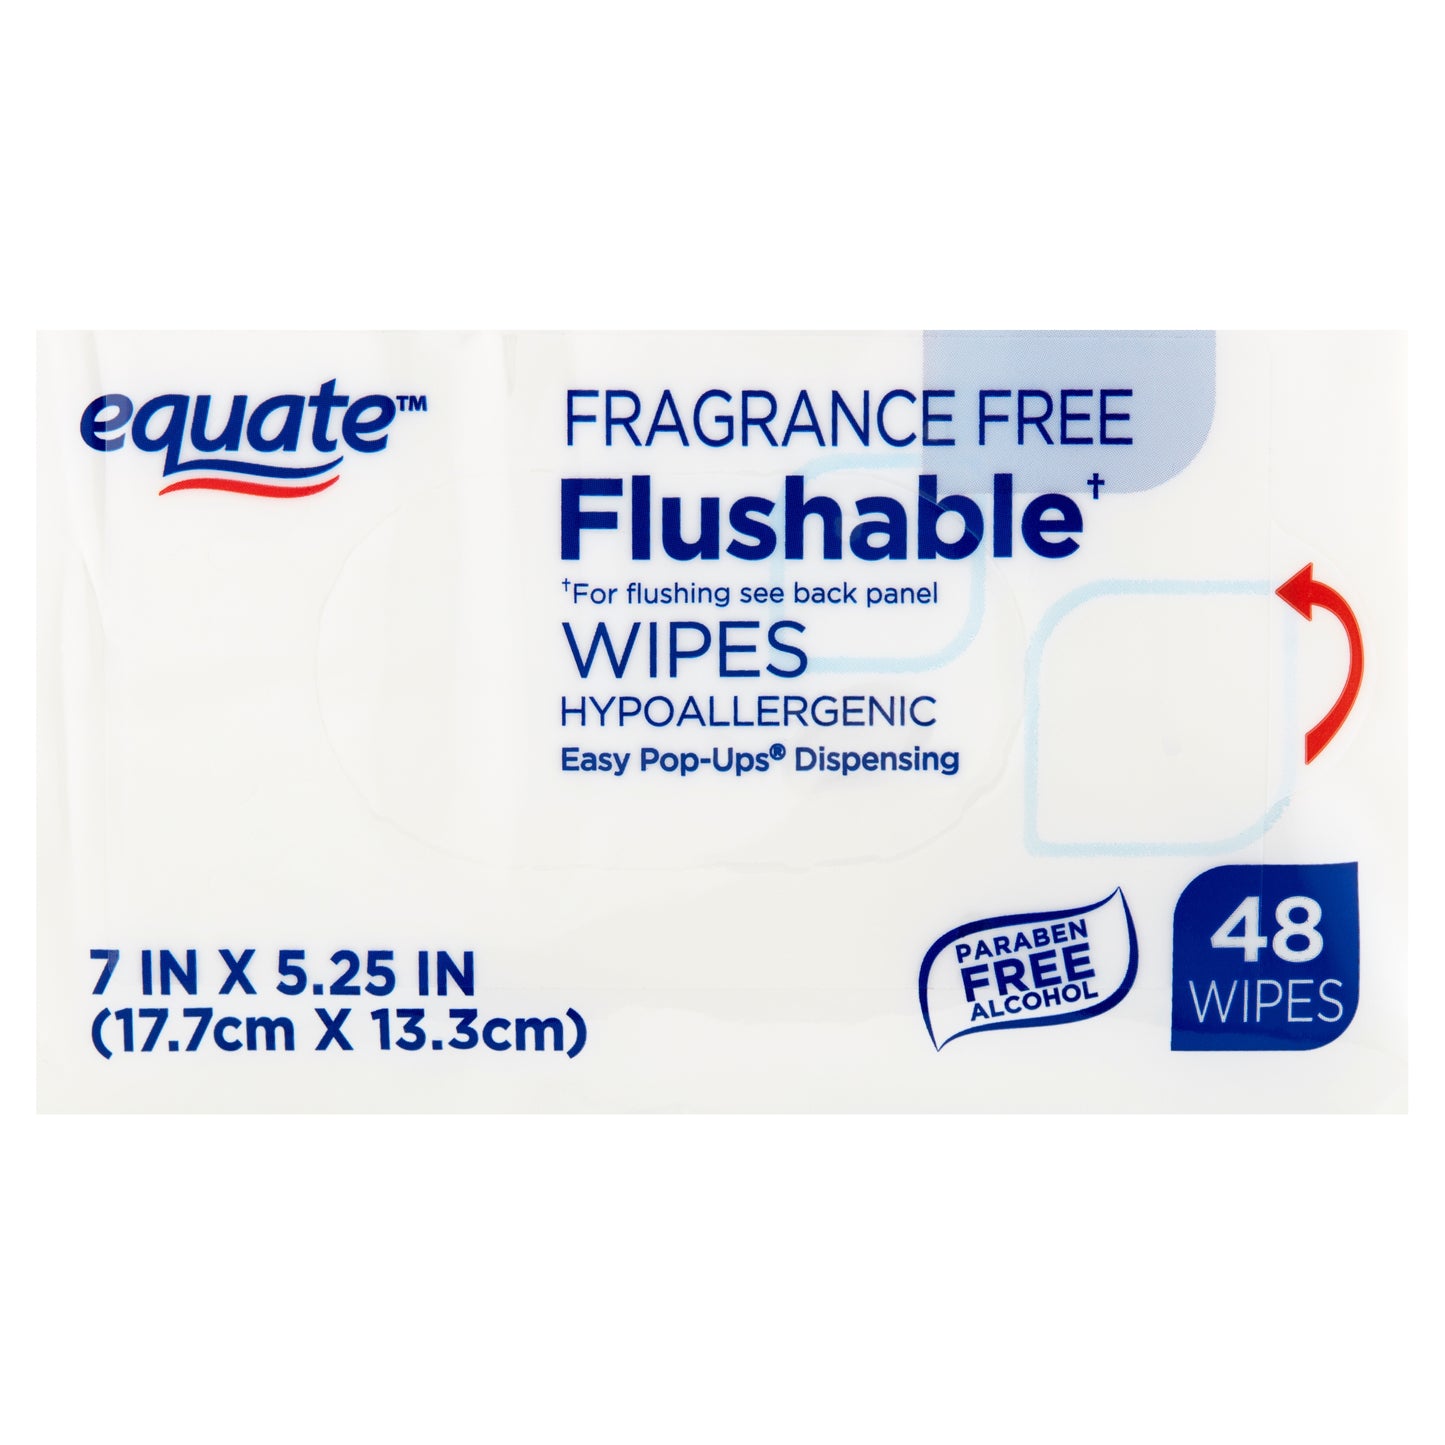 Equate Fragrance Free Flushable Wipes Value Pack, 48 count, 3 pack = 144 Wipes